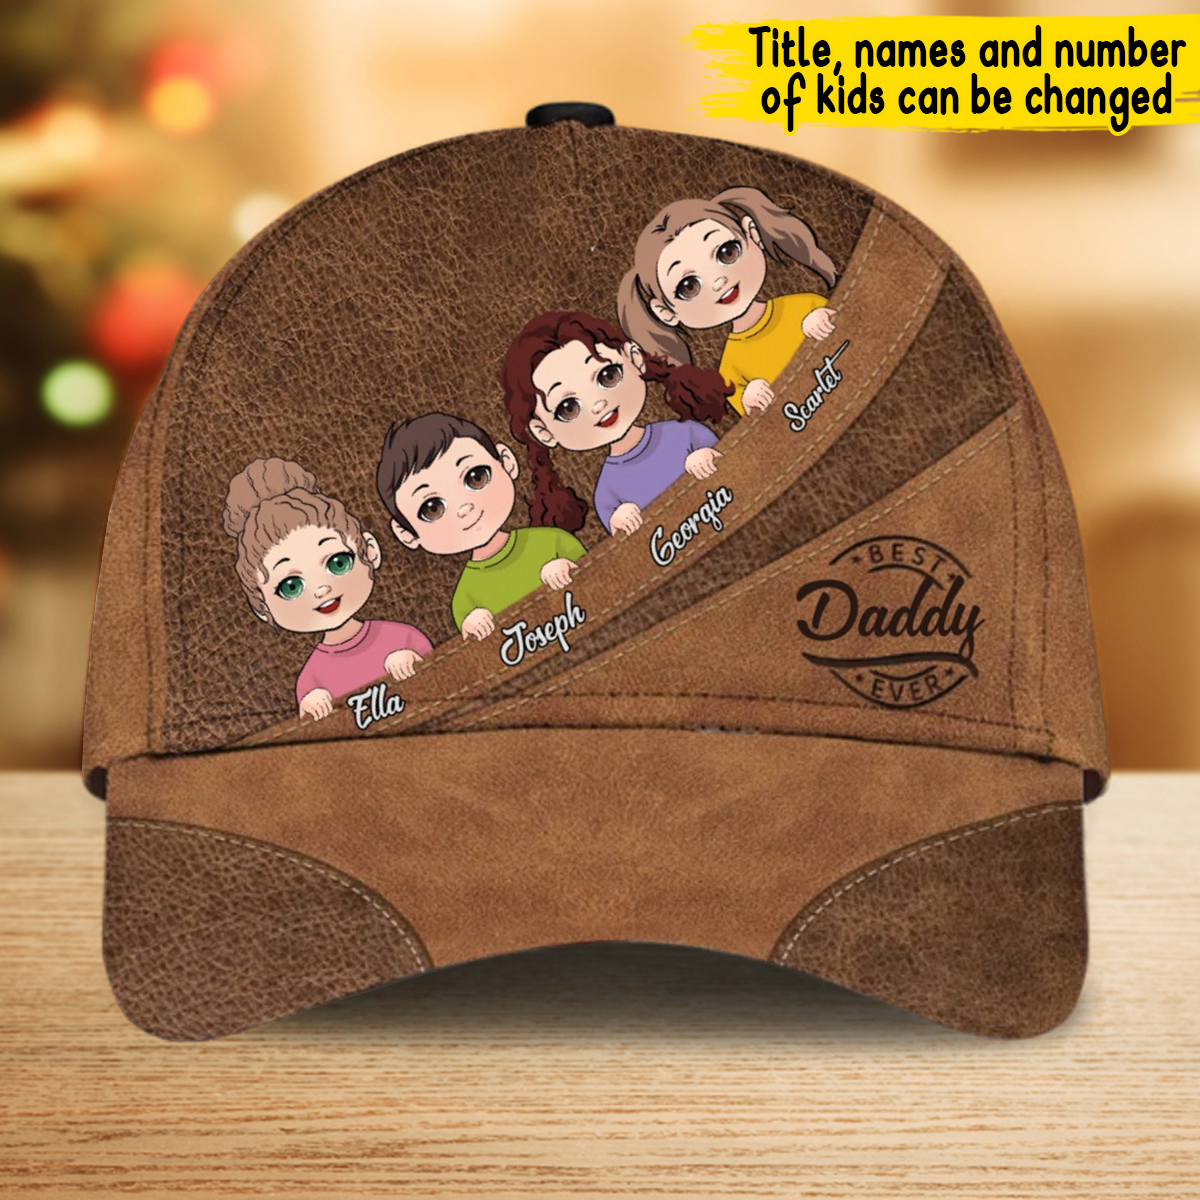 Best Dad Ever - Gift for dad, grandma, grandpa, mom, uncle, aunt - Personalized Leather Pattern Printed Classic Cap